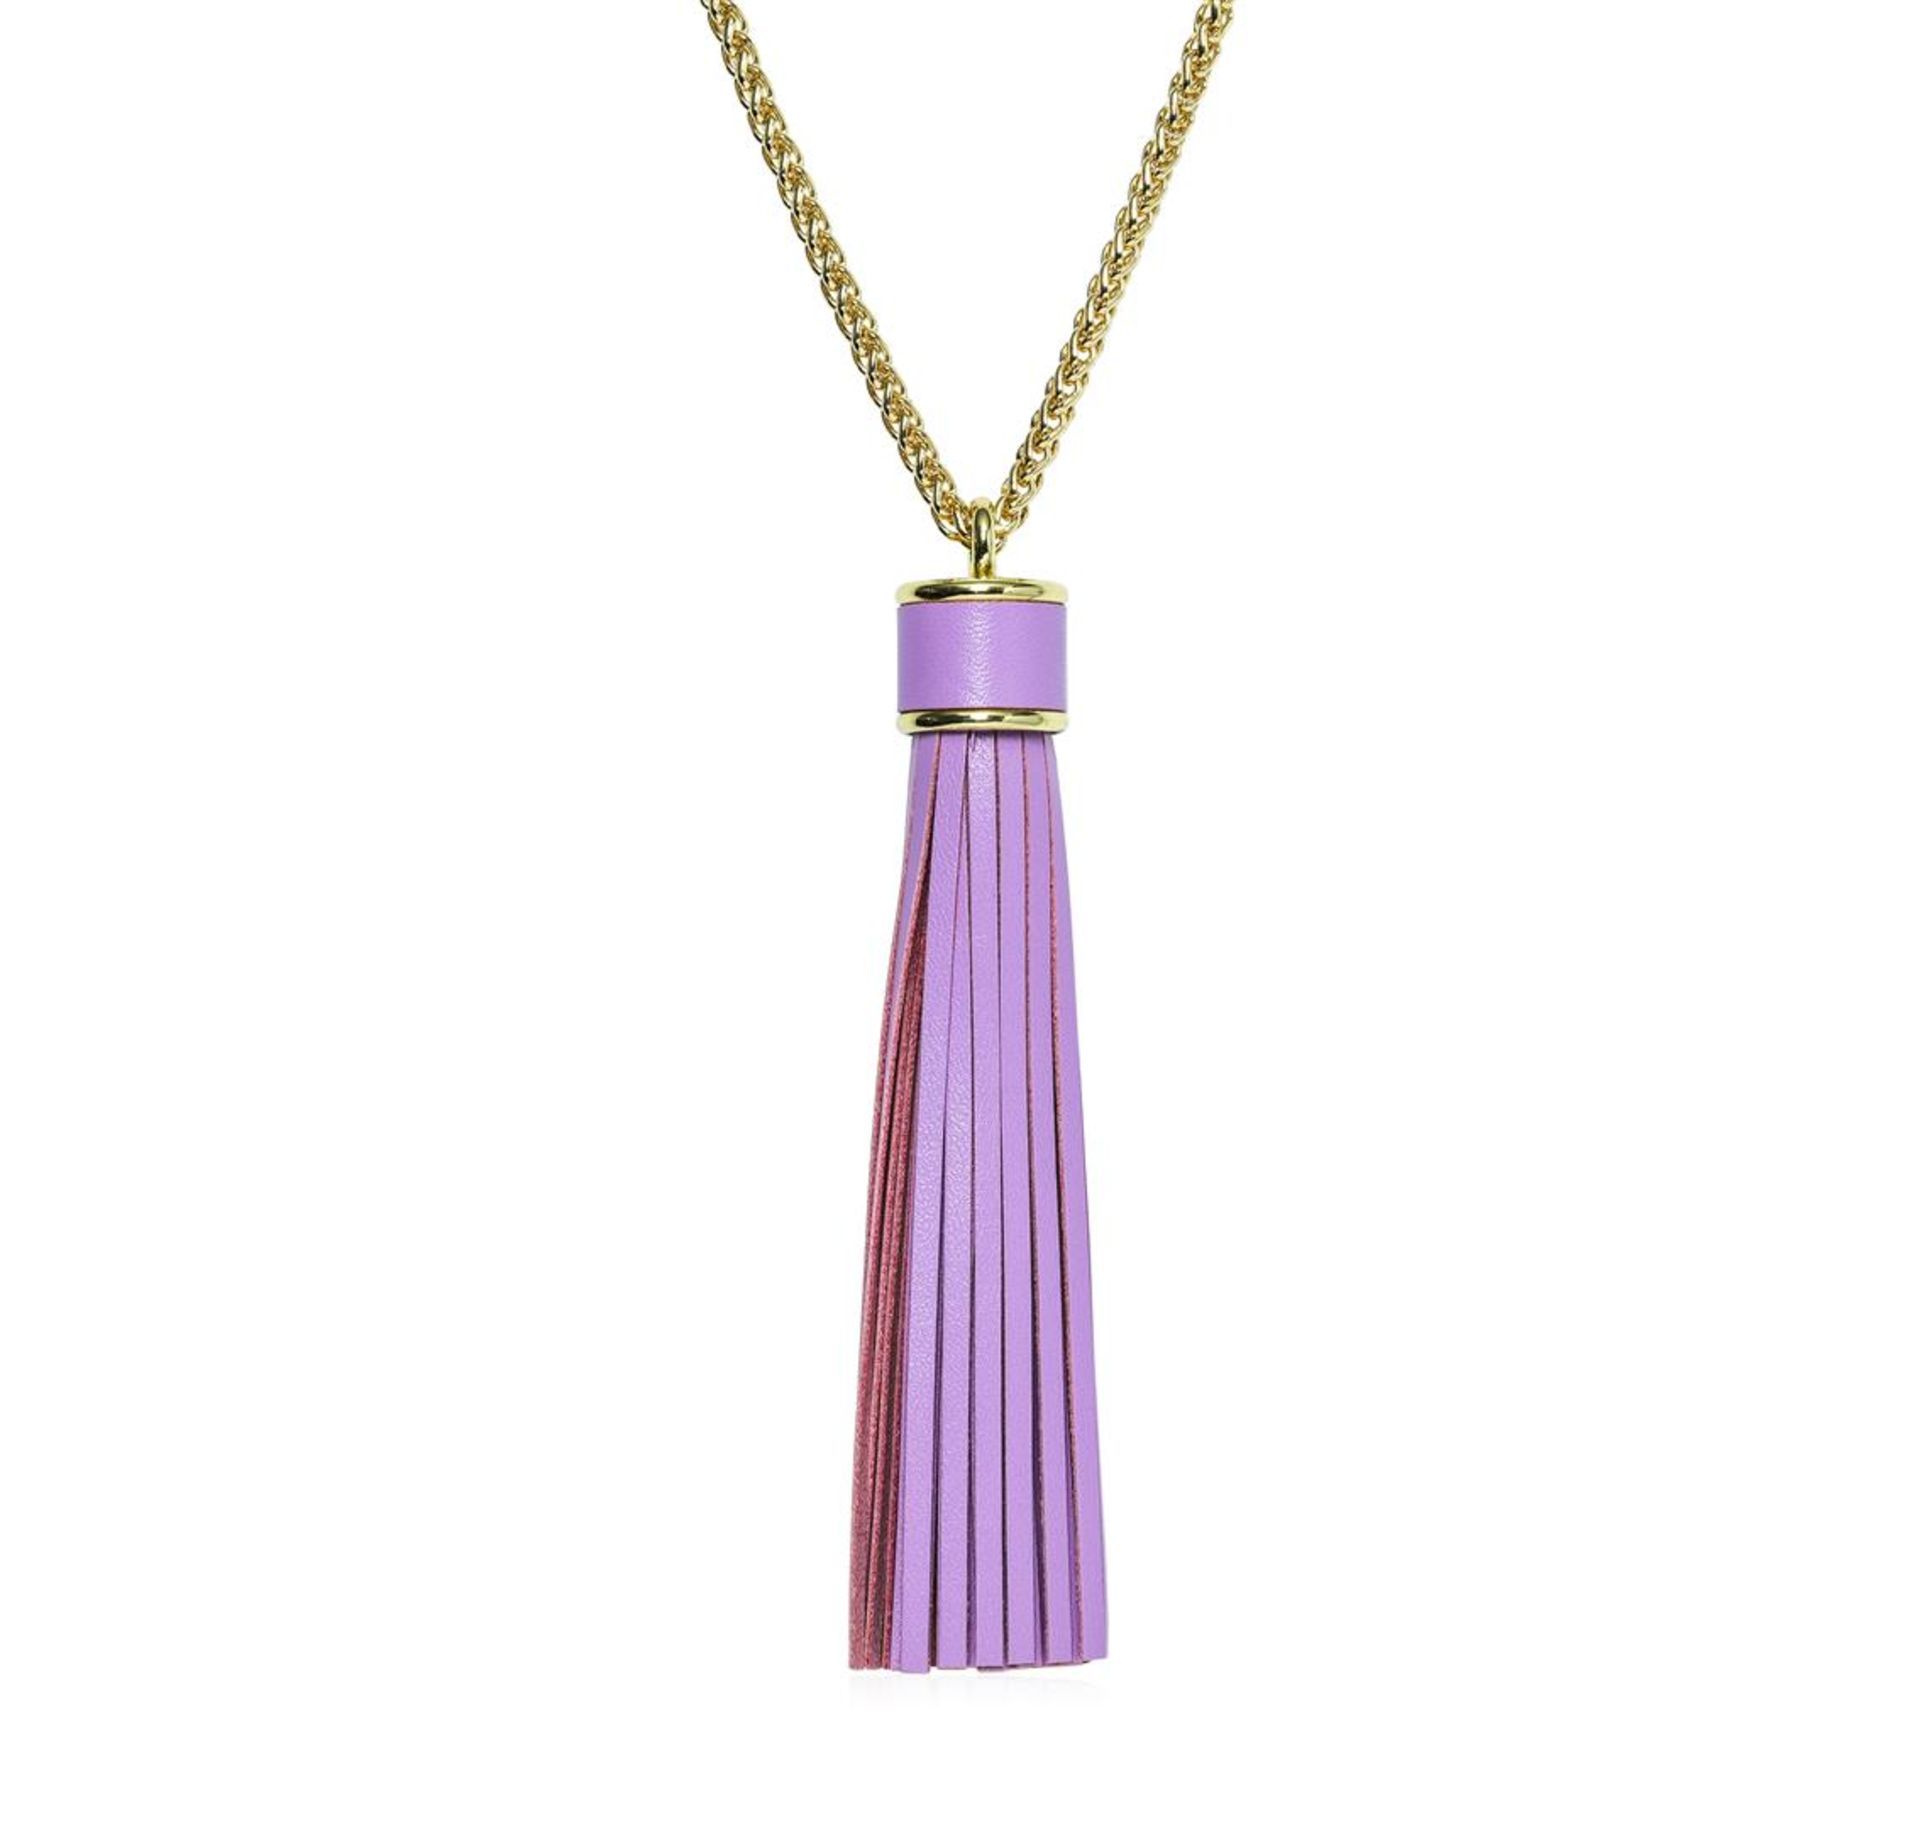 Leather Tassel Chain Necklace - Gold Plated - Image 2 of 2